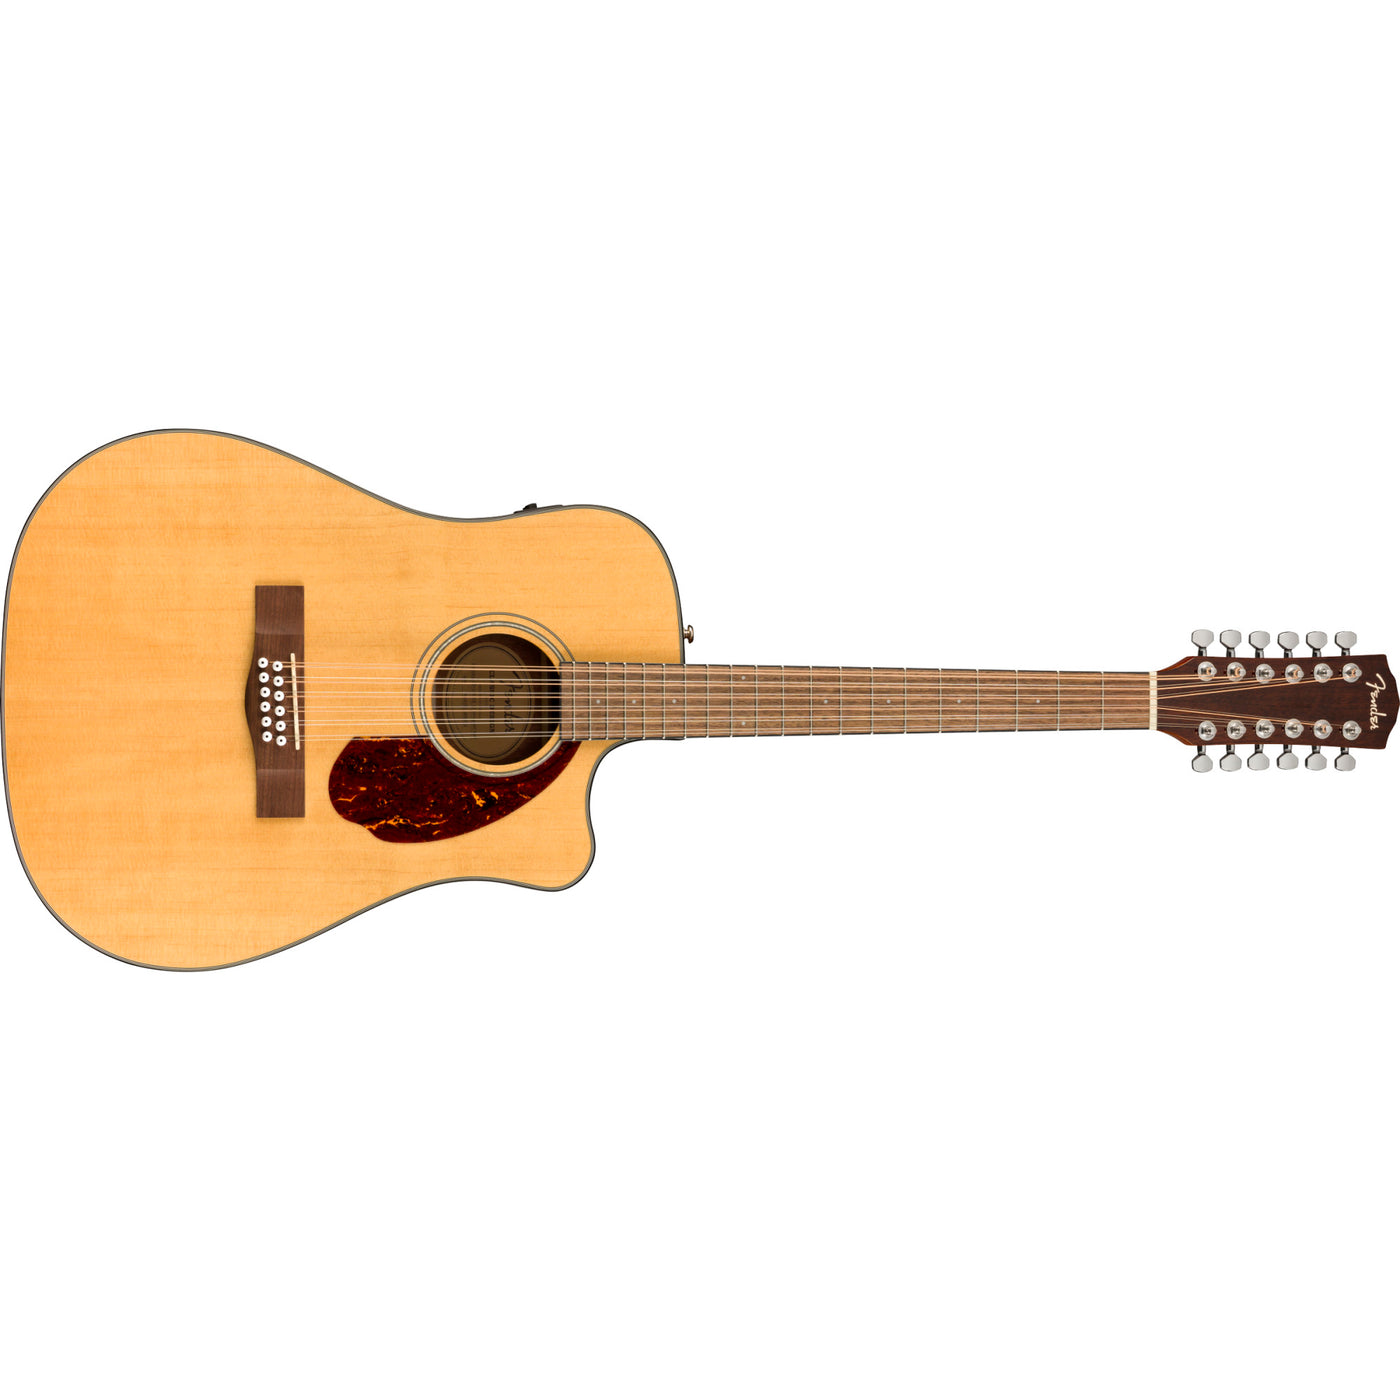 Fender CD-140SCE 12-String Acoustic Electric Guitar with Case, Natural (0970293321)